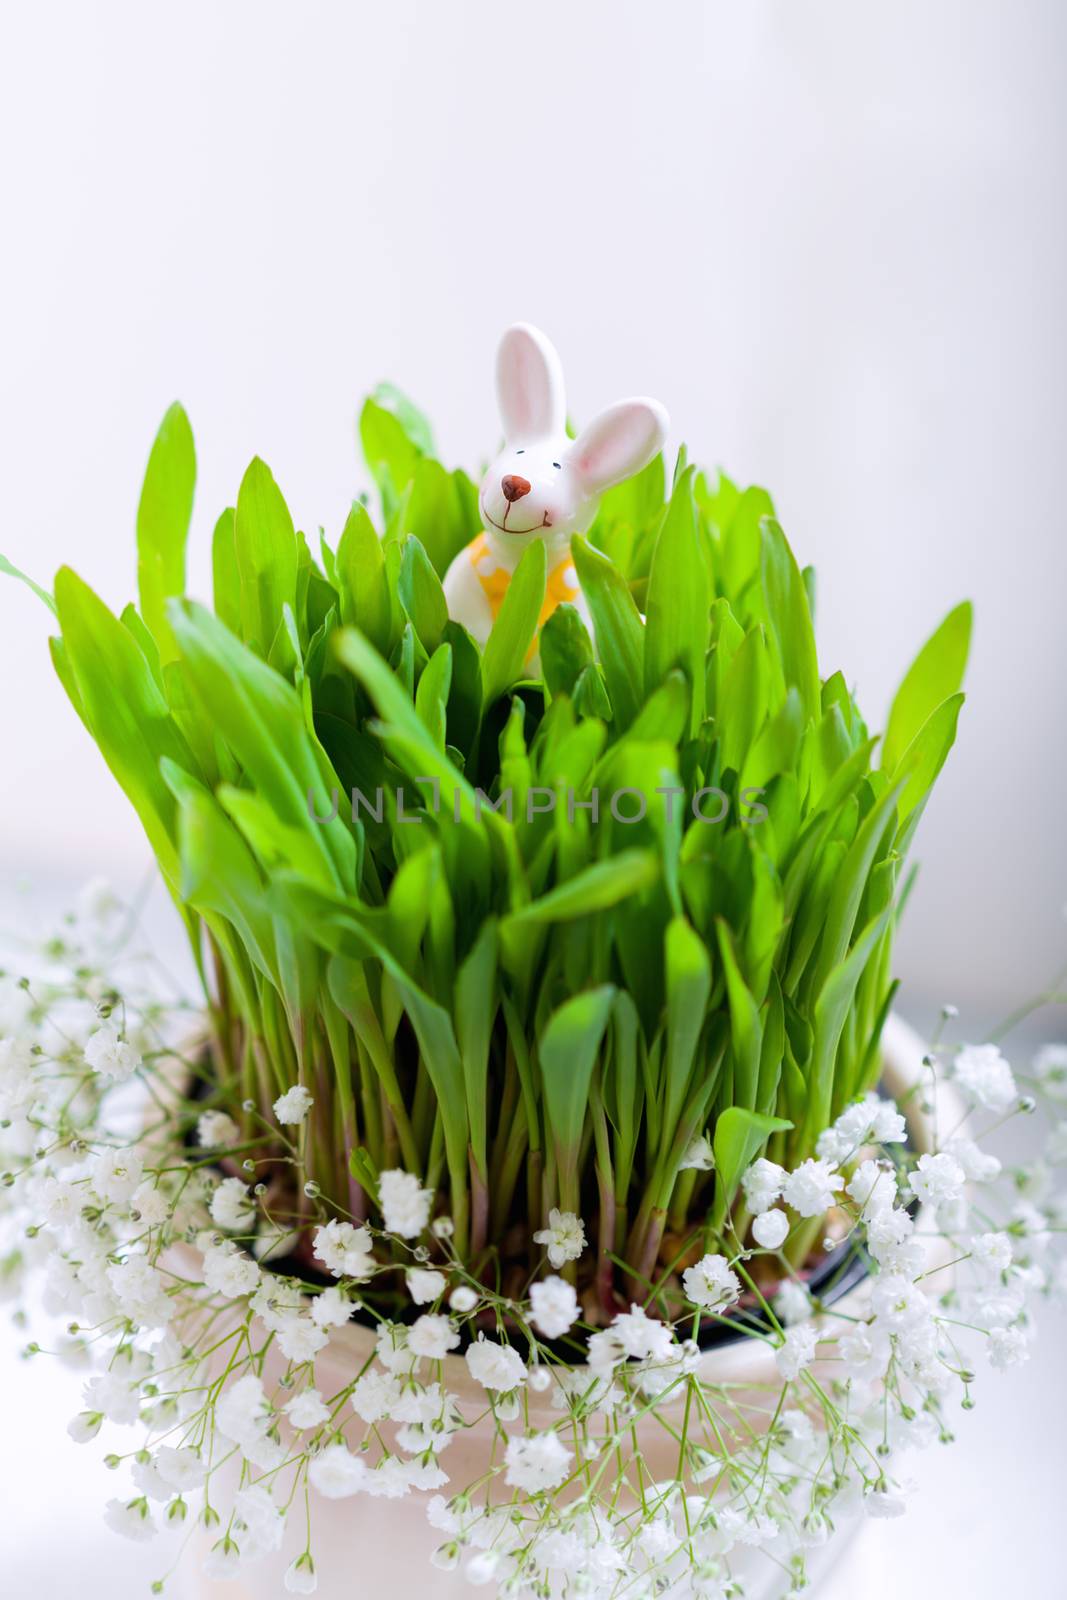 Bunny, eggs and white flowers Easter symbols. by supercat67